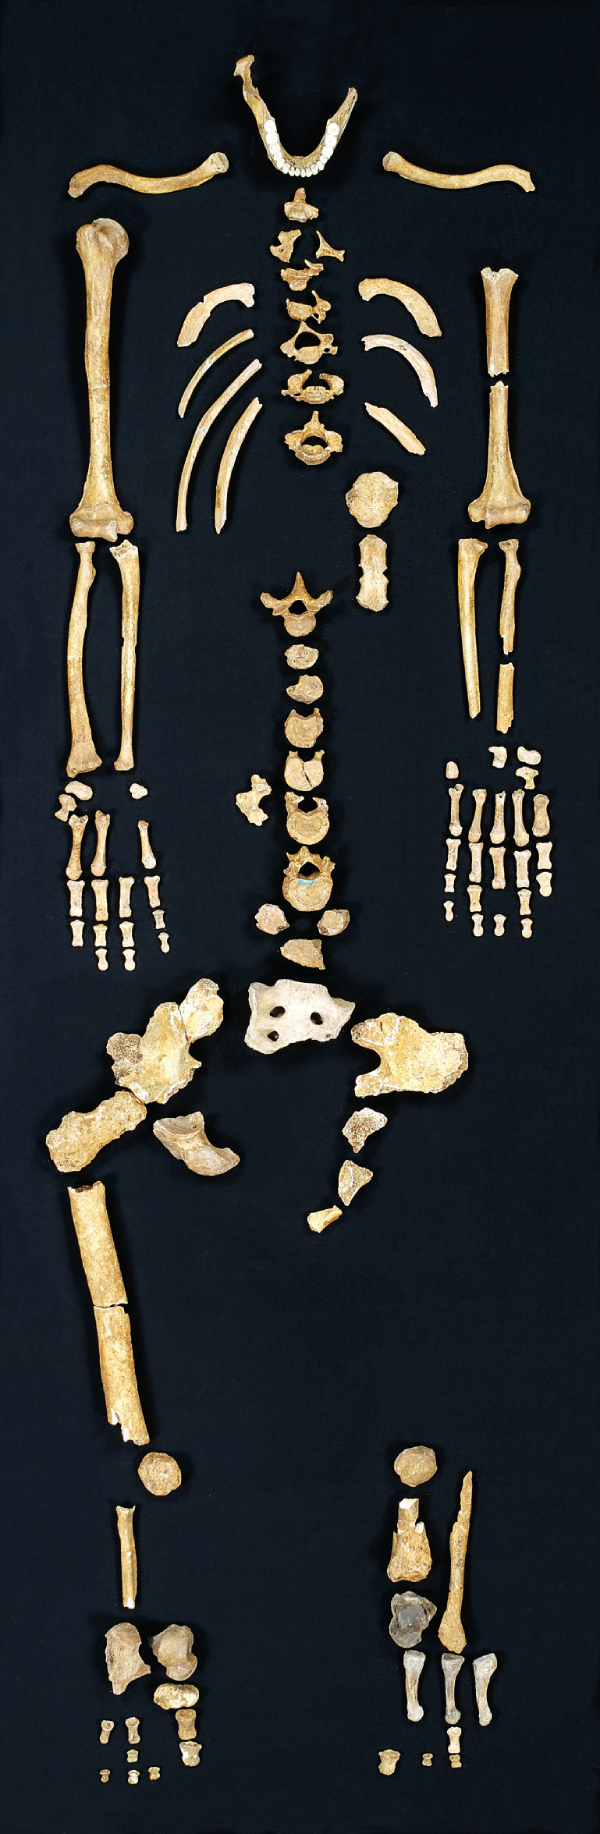 70 000 year old Neanderthal remains, from Le Regordou, in France, with the head and femur missing